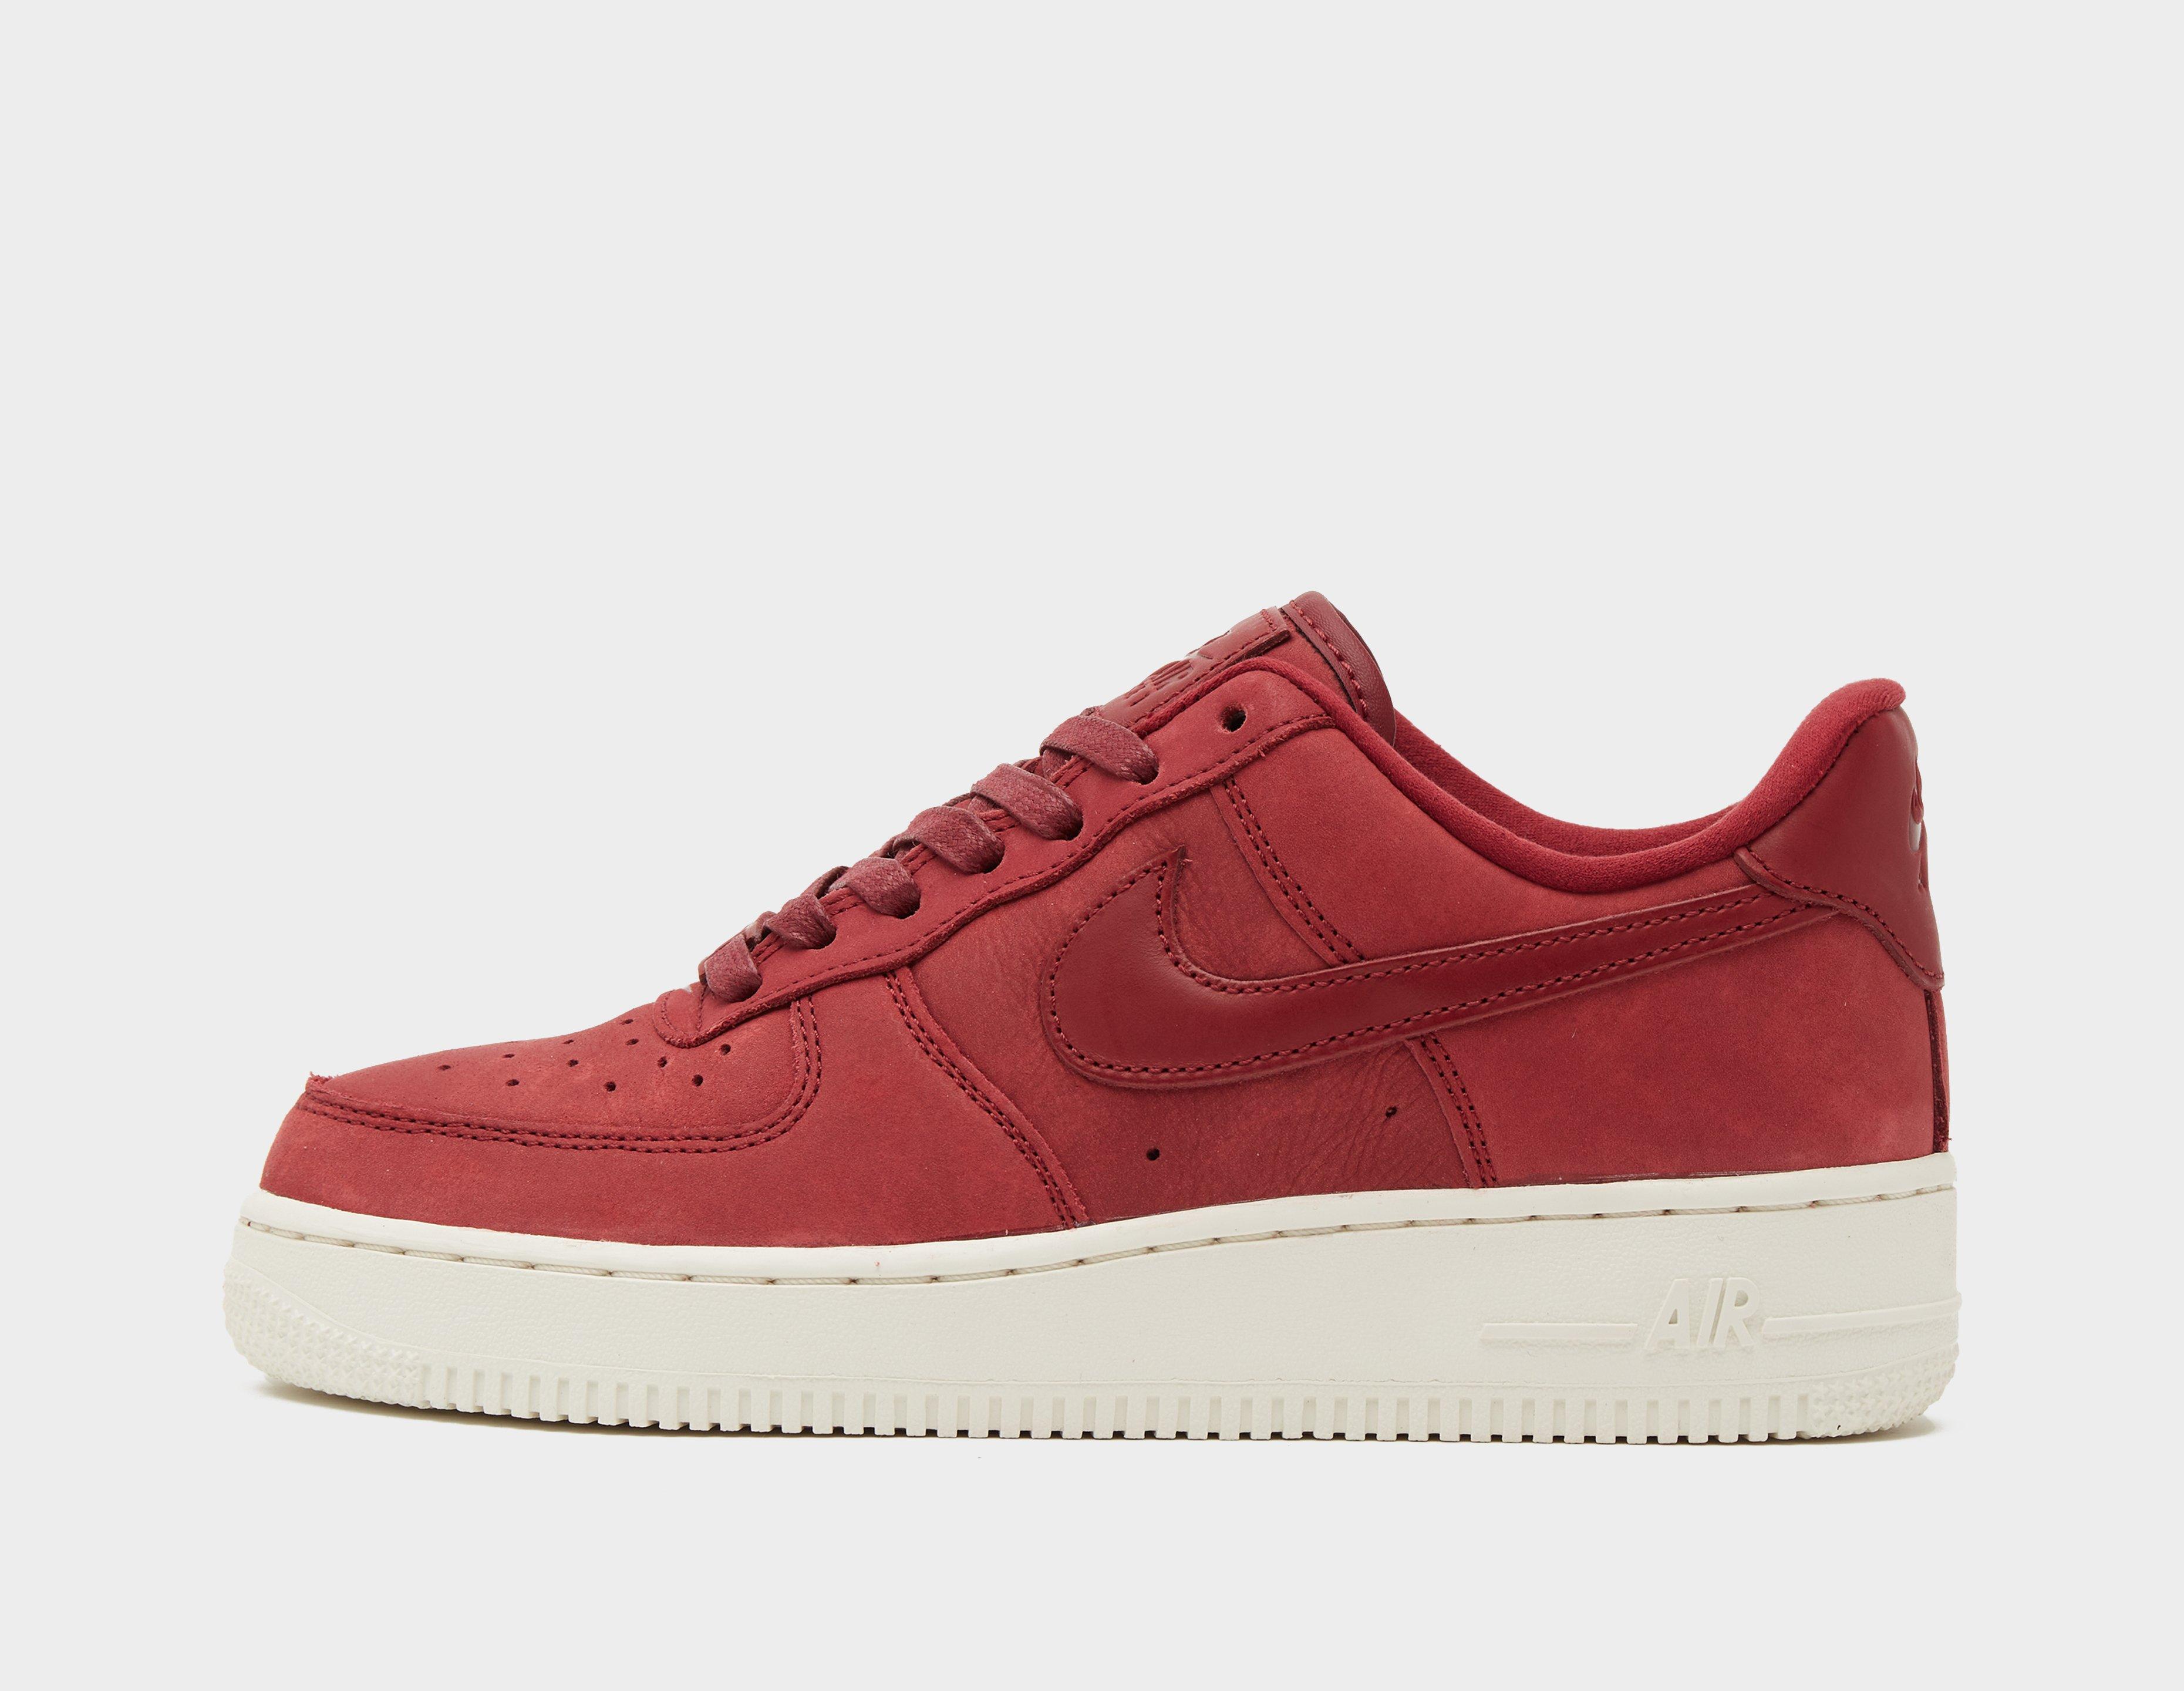 Nike Air Force 1 Womens Premium Team Red/Gym Red Size 9